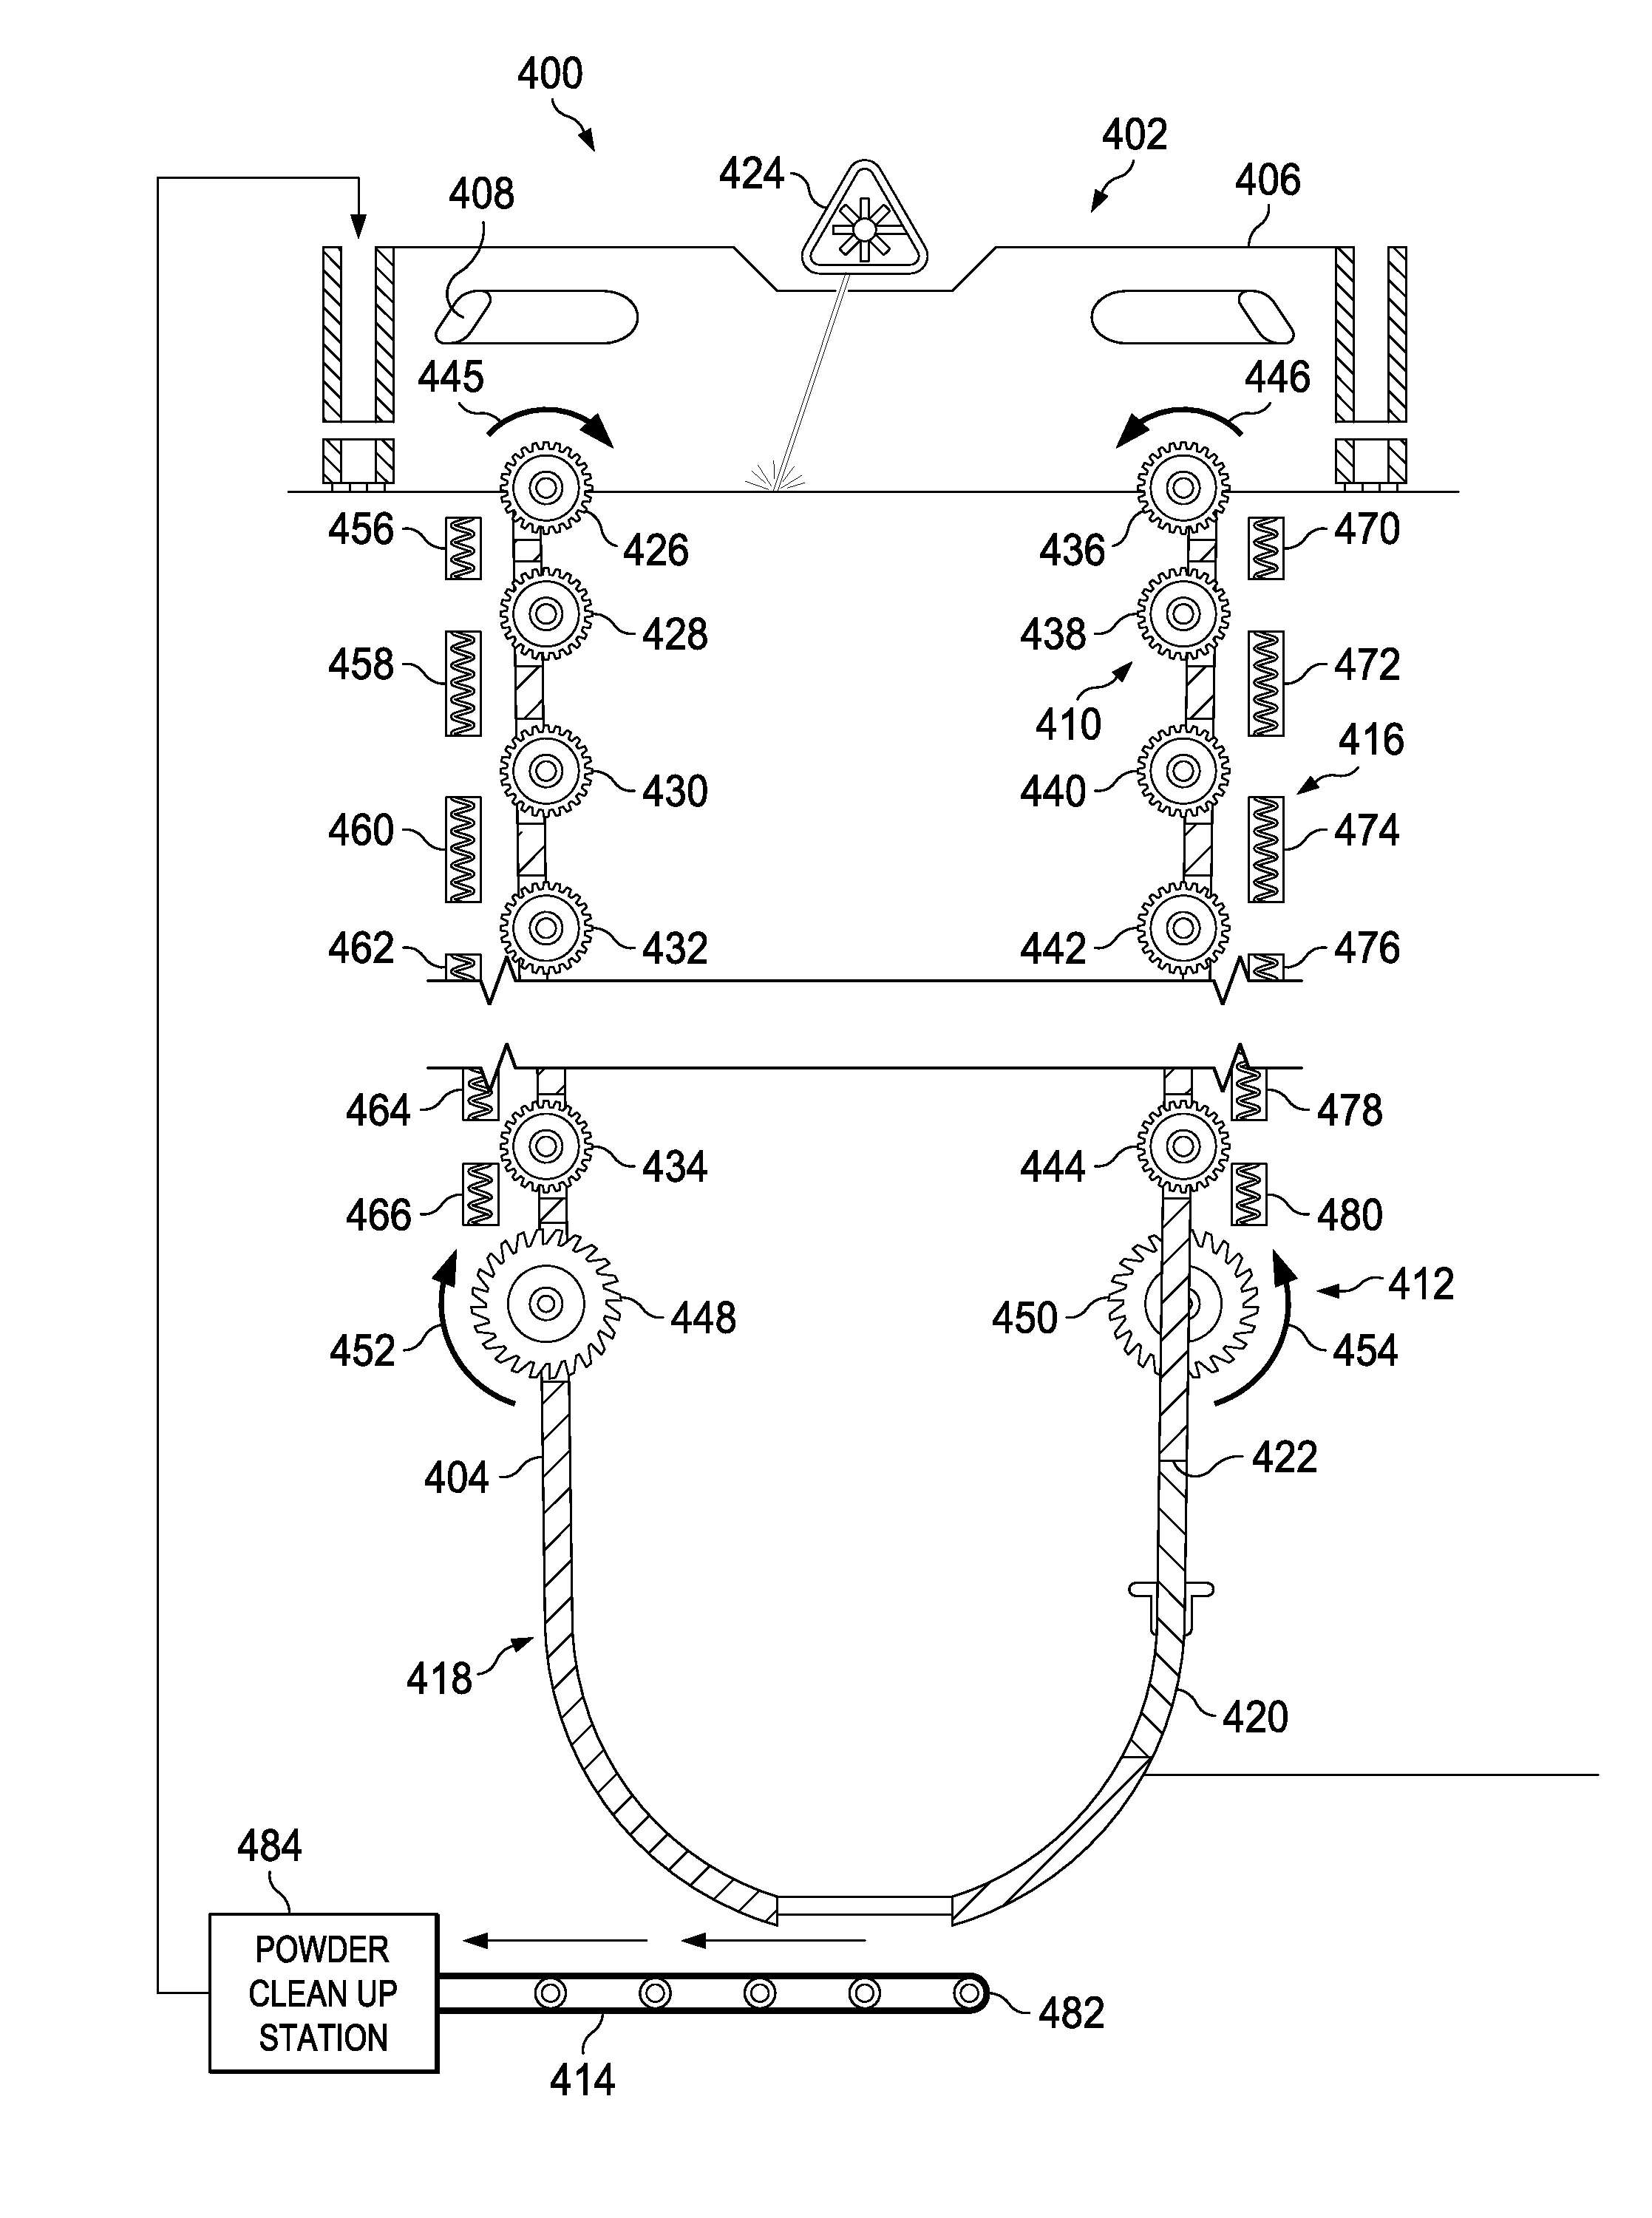 Continuous Linear Production in a Selective Laser Sintering System